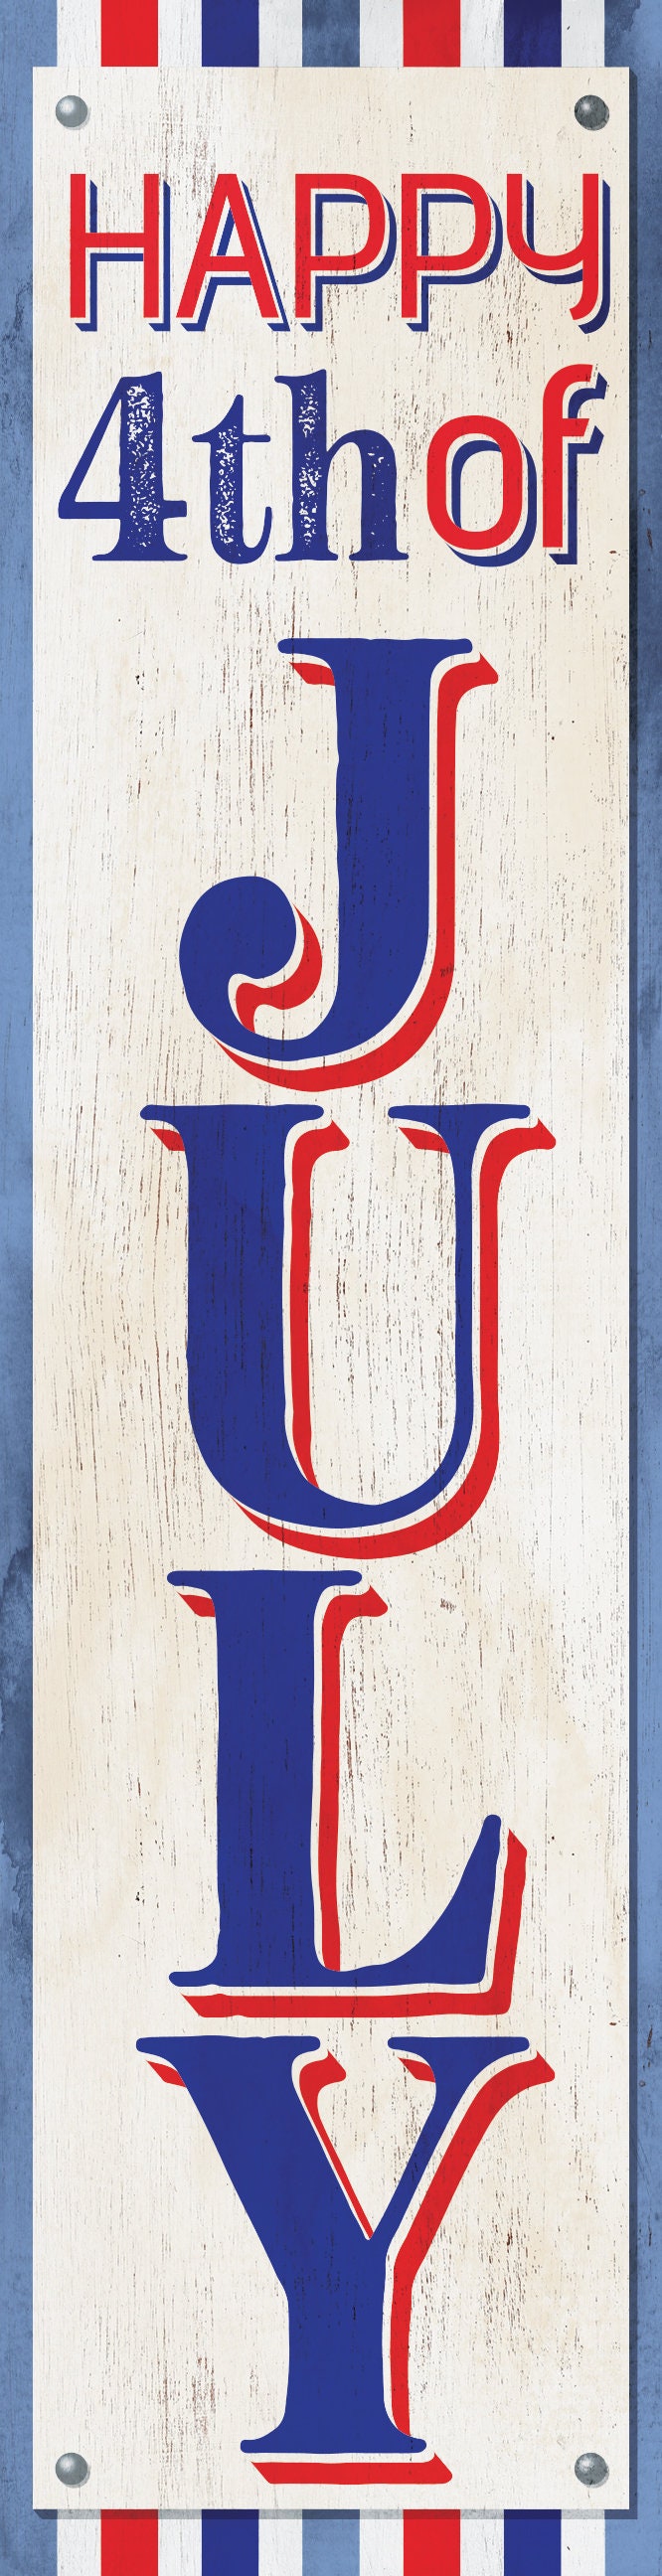 36in Celebrate the 4th of July with a Wooden Happy Porch Sign for Your Front Door